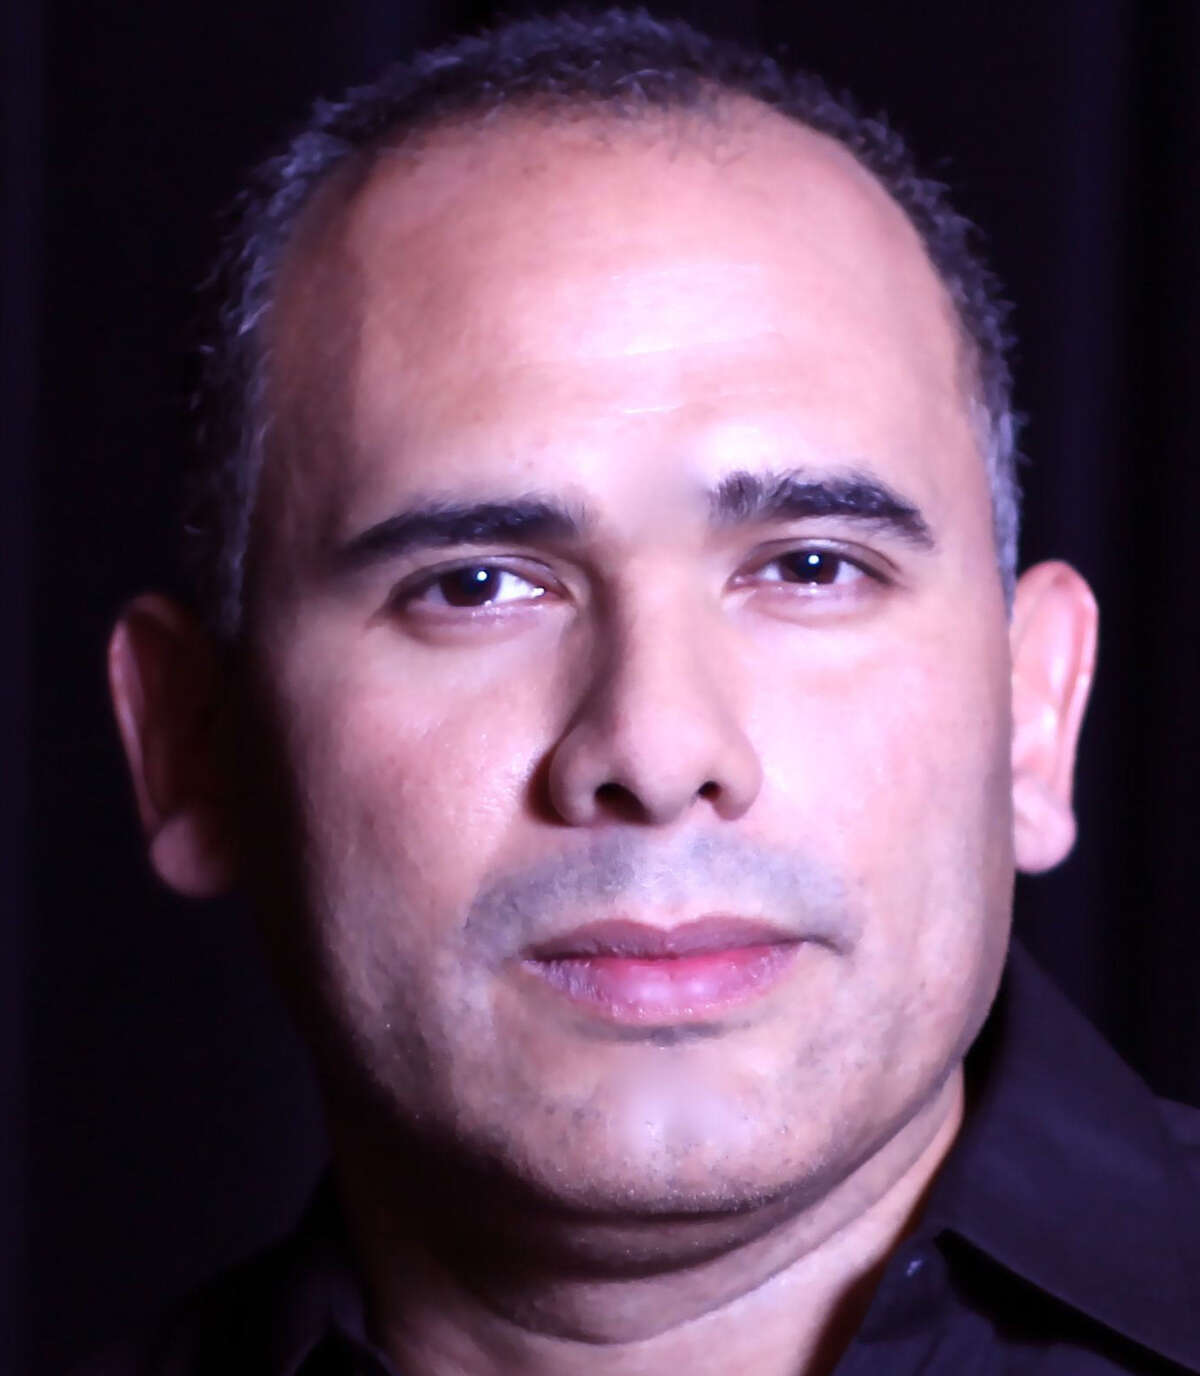 San Antonian Jesus Alonzo wrote "Jotos del Barrio," which is being published by Korima Press and is being staged at the Esperanza Peace & Justice Center.